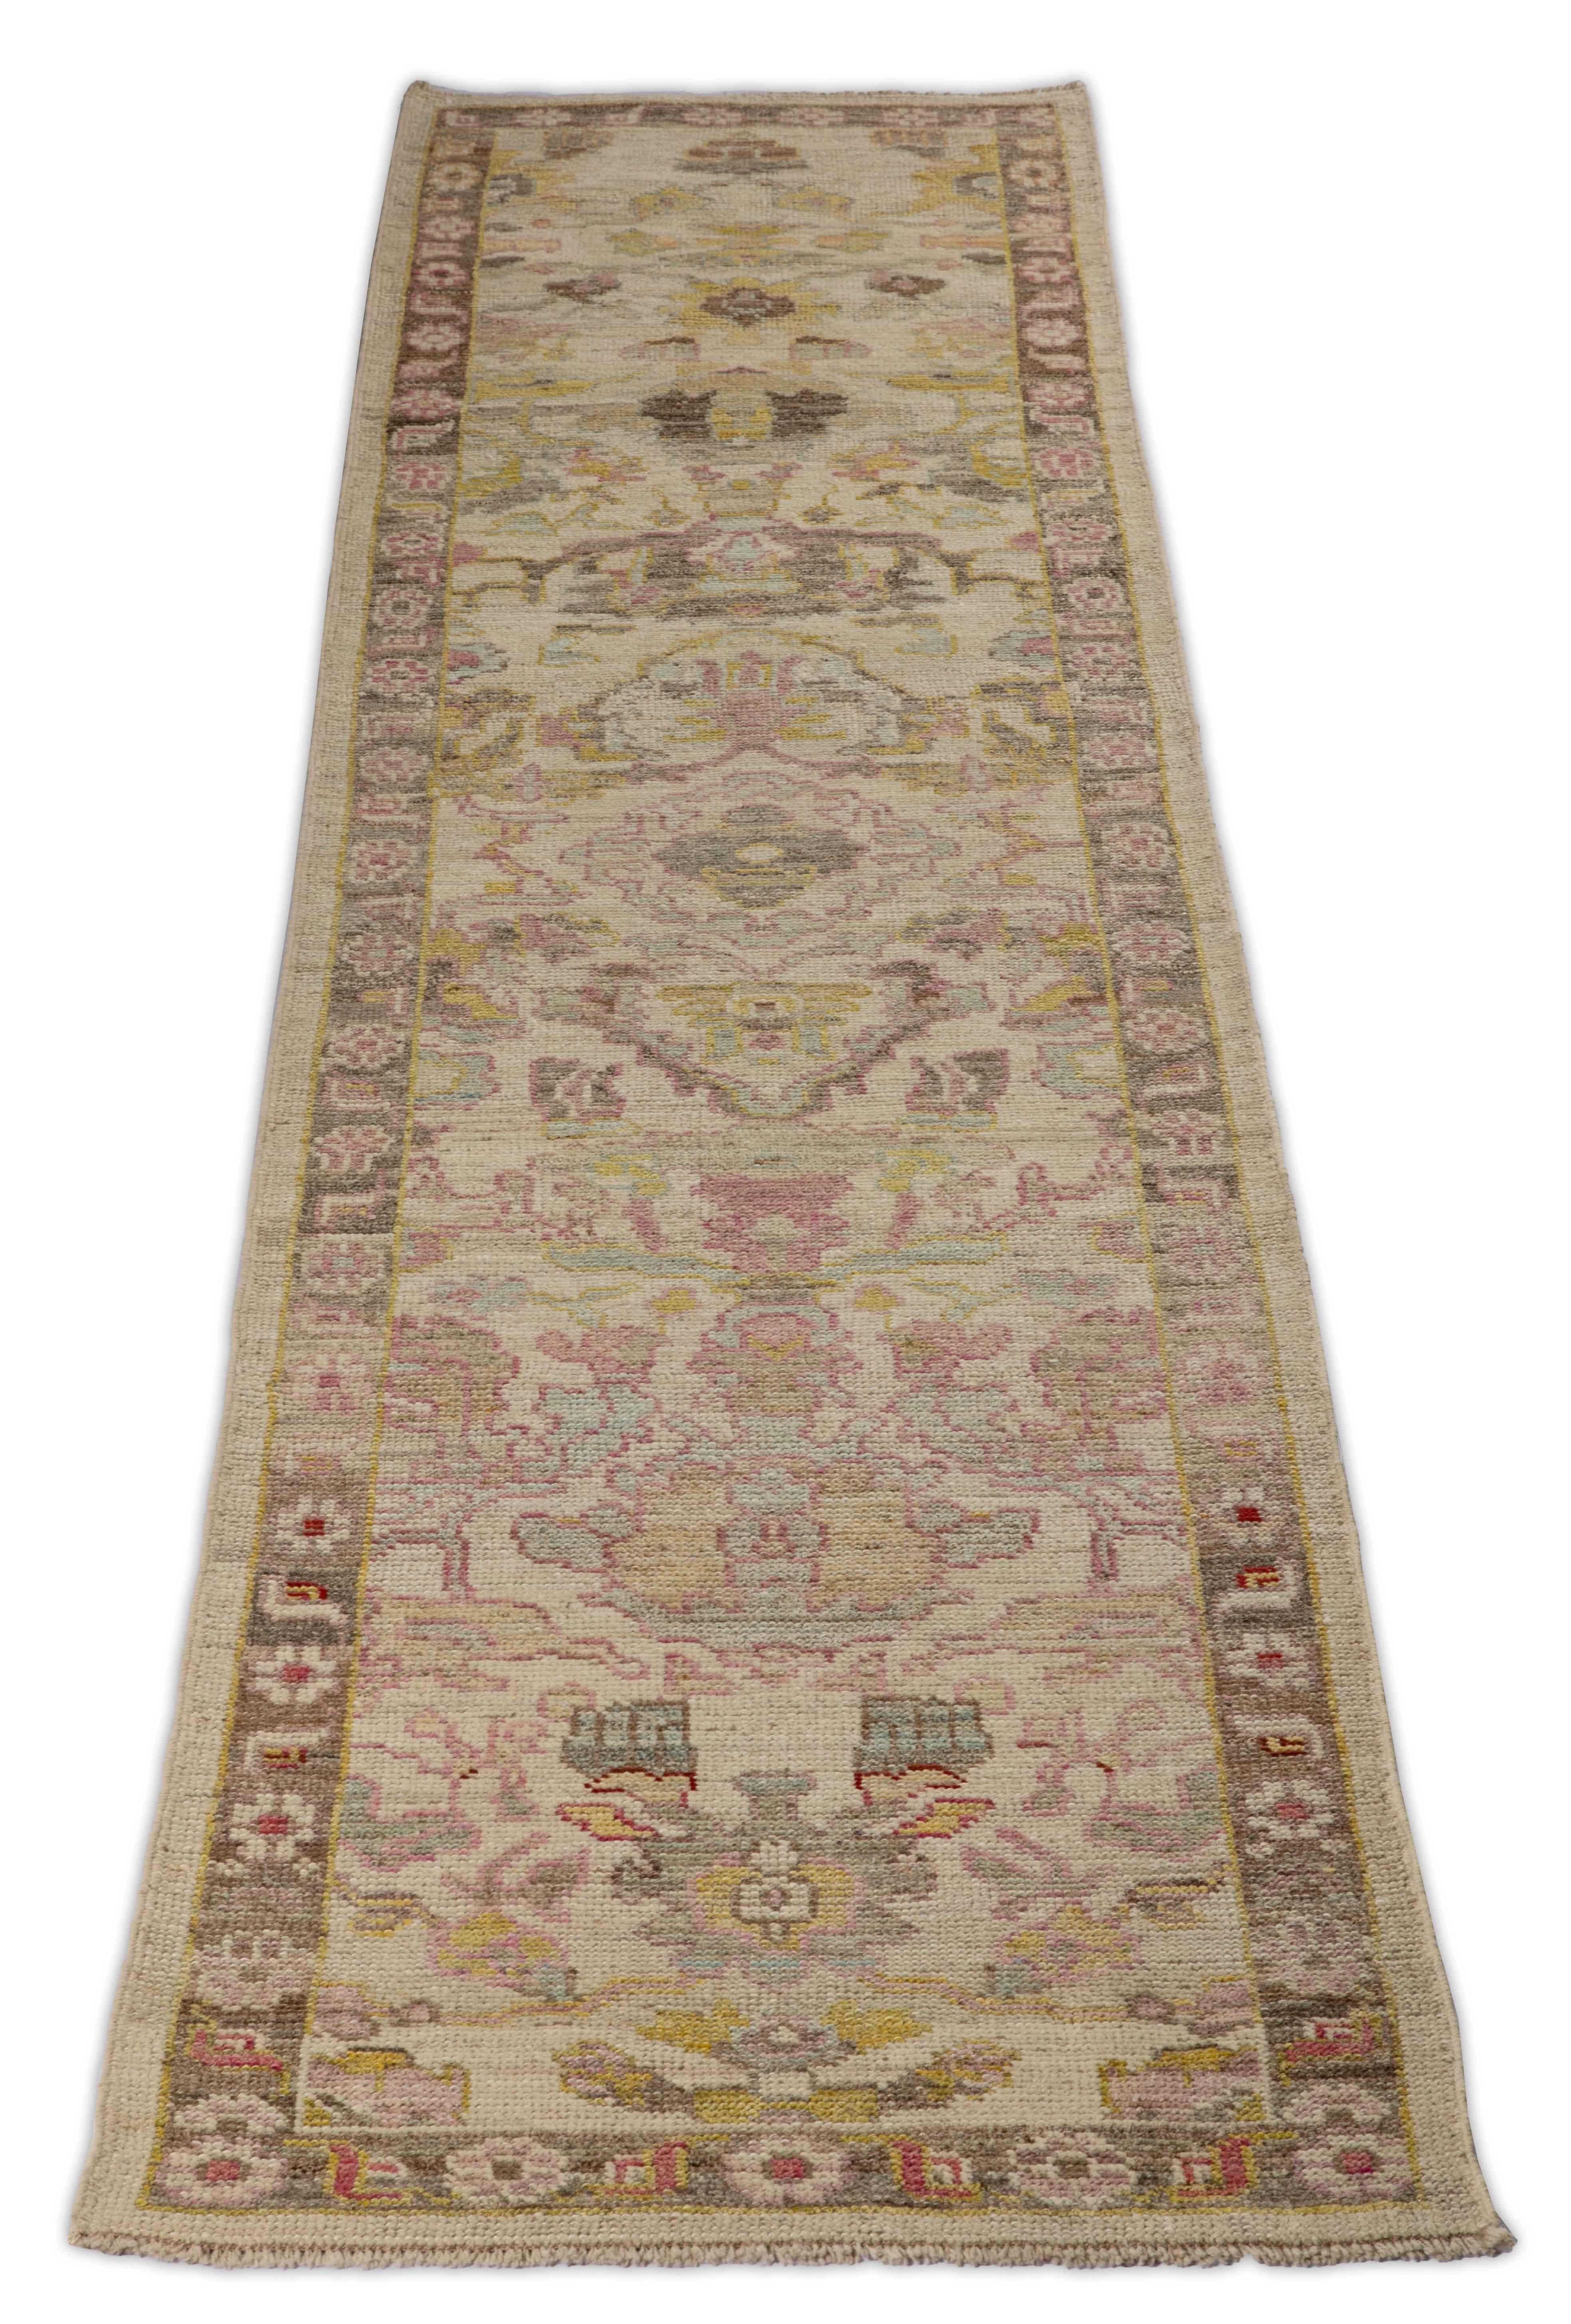 New Turkish runner rug made of handwoven sheep’s wool of the finest quality. It’s colored with organic vegetable dyes that are certified safe for humans and pets alike. It features a long, ivory field with flower details allover in brown, pink and